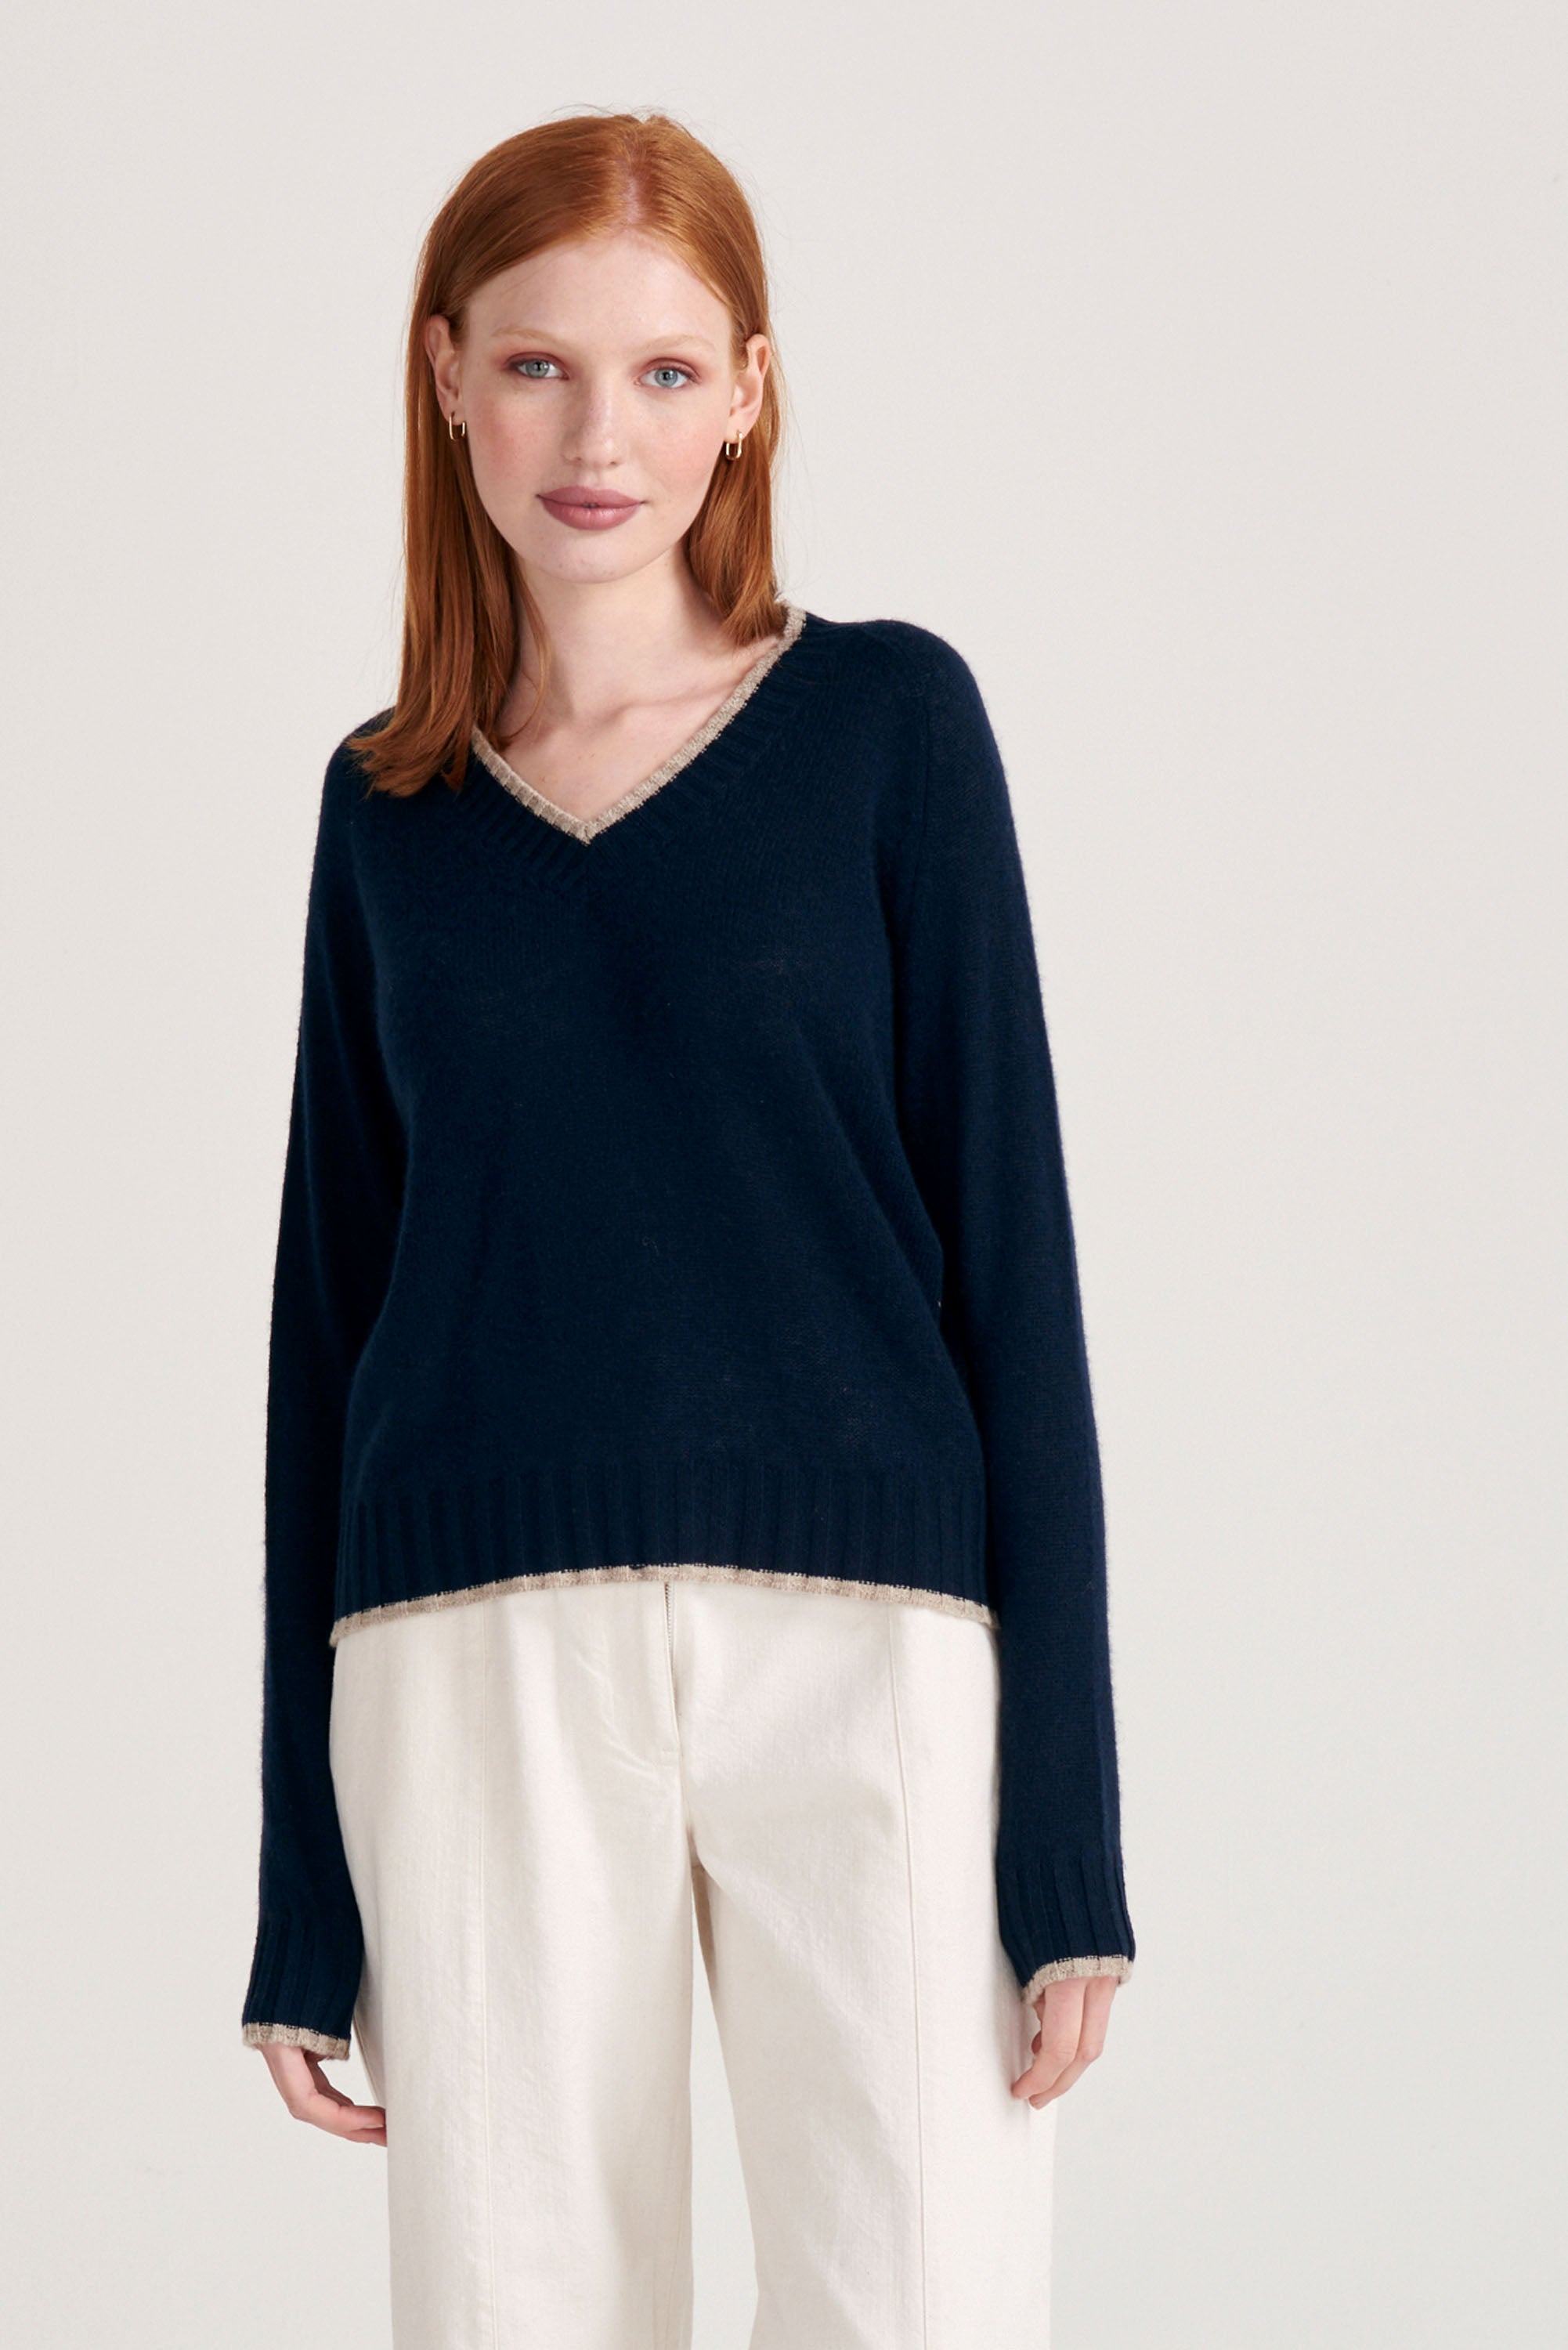 Red haired model wearing Jumper1234 cashmere vee neck jumper in navy with organic light brown tipping